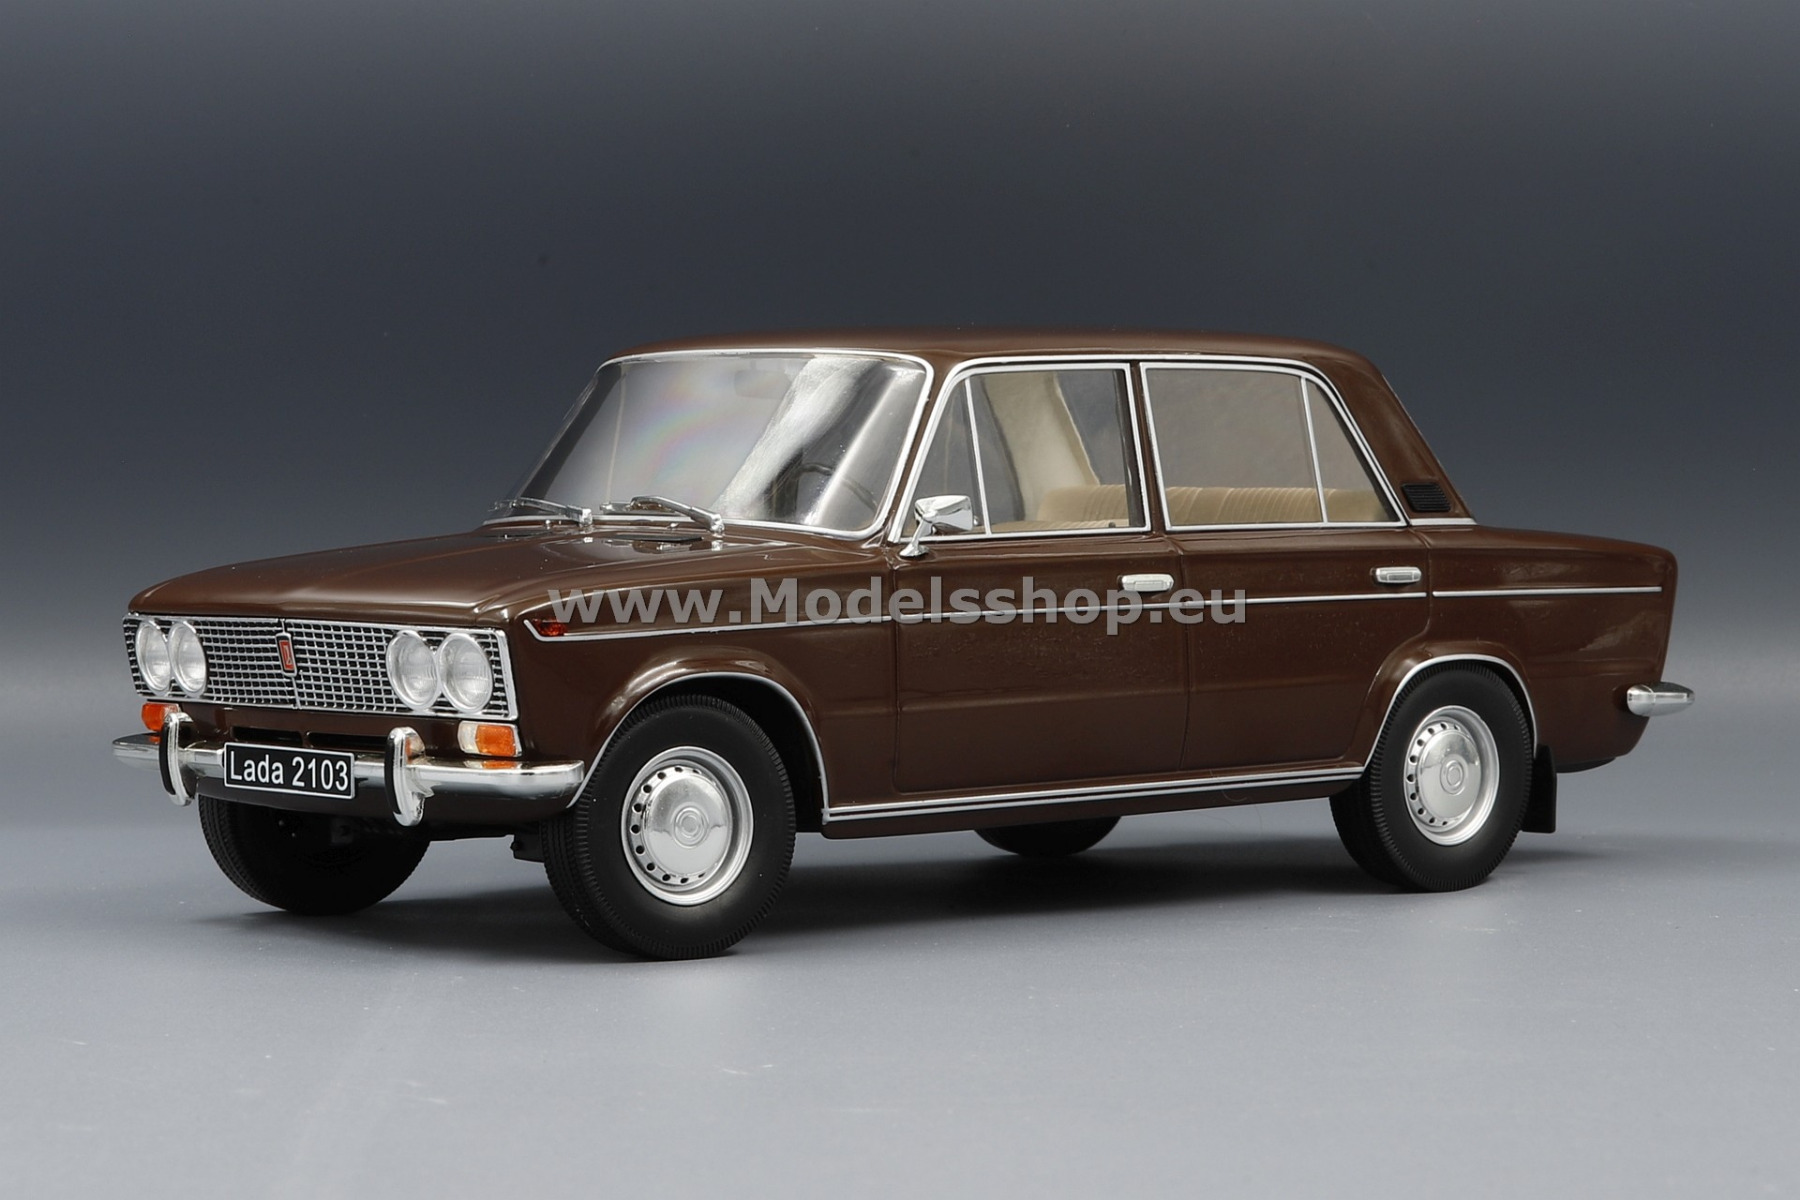 LADA VAZ-2103, 1975 /choclate brown with beige interior/